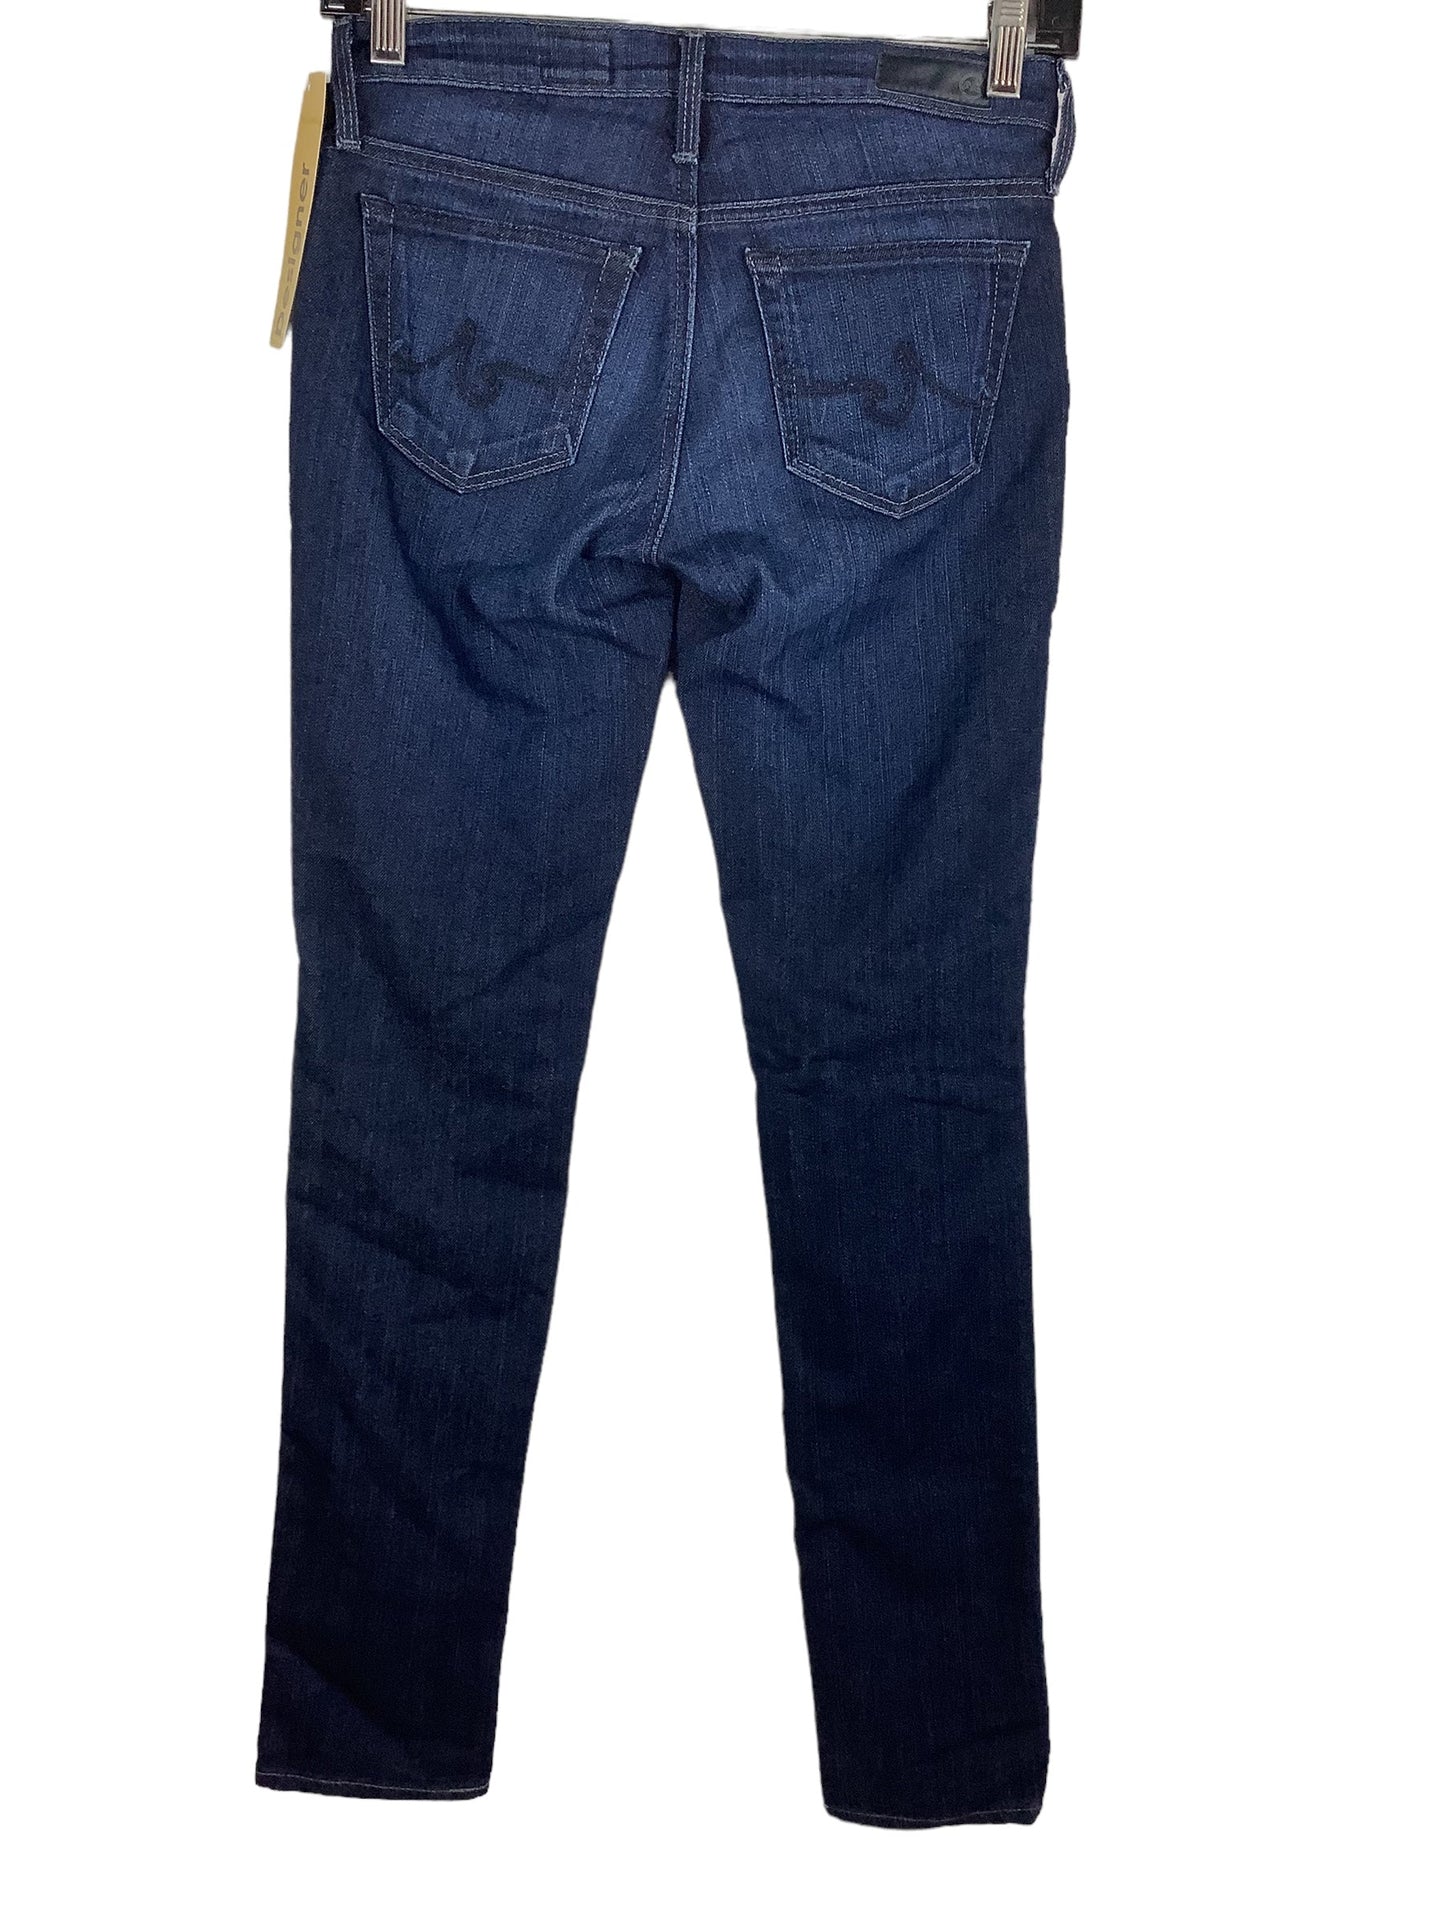 Jeans Designer By Adriano Goldschmied  Size: 0